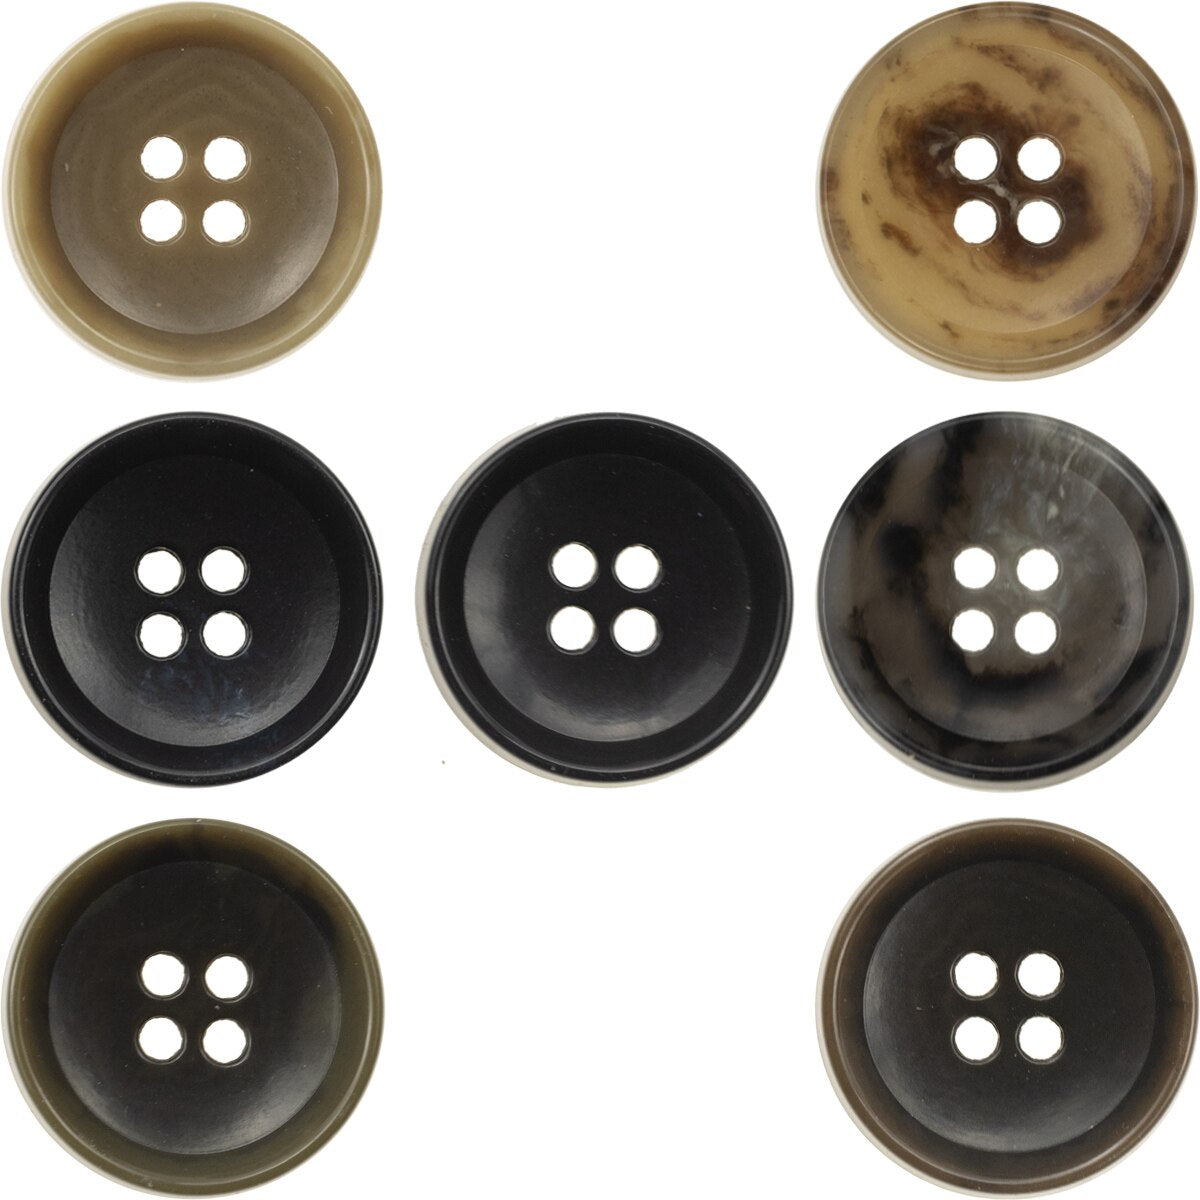 Black Beige Urea Buttons Chino Suit Sewing Accessories for Jacket Blazer Knitwear